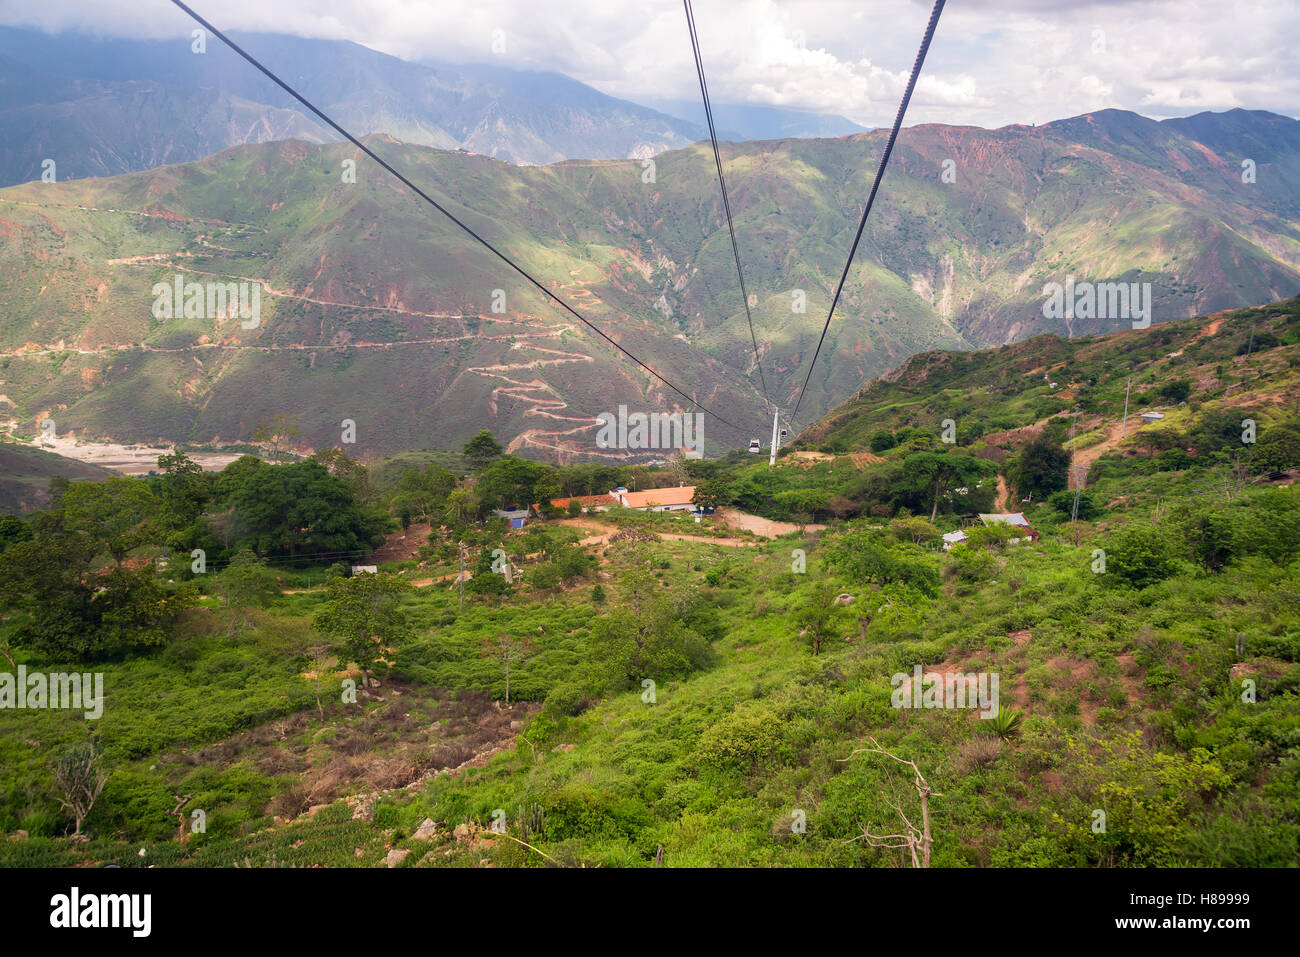 View of Chicamocha Canyon as seen from the aerial tram that spans the width of the canyon in Santander, Colombia Stock Photo